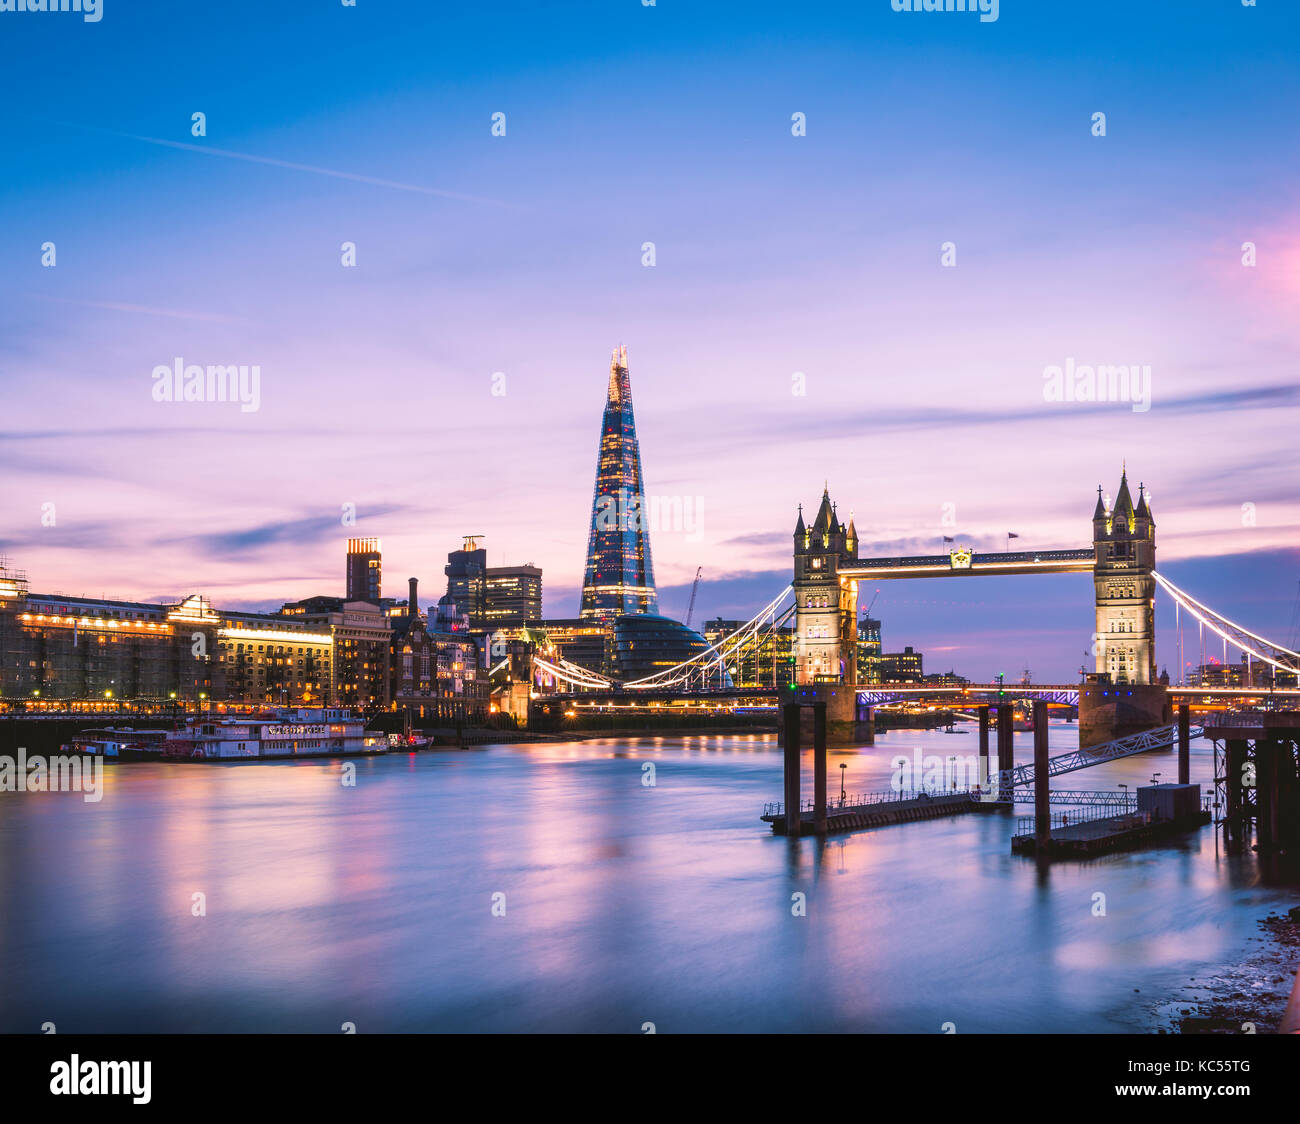 Themse, Tower Bridge, The Shard, Sunset, illuminé, vue sur l'eau, Southwark, St Katharine's & Wapping, Londres, Angleterre Banque D'Images